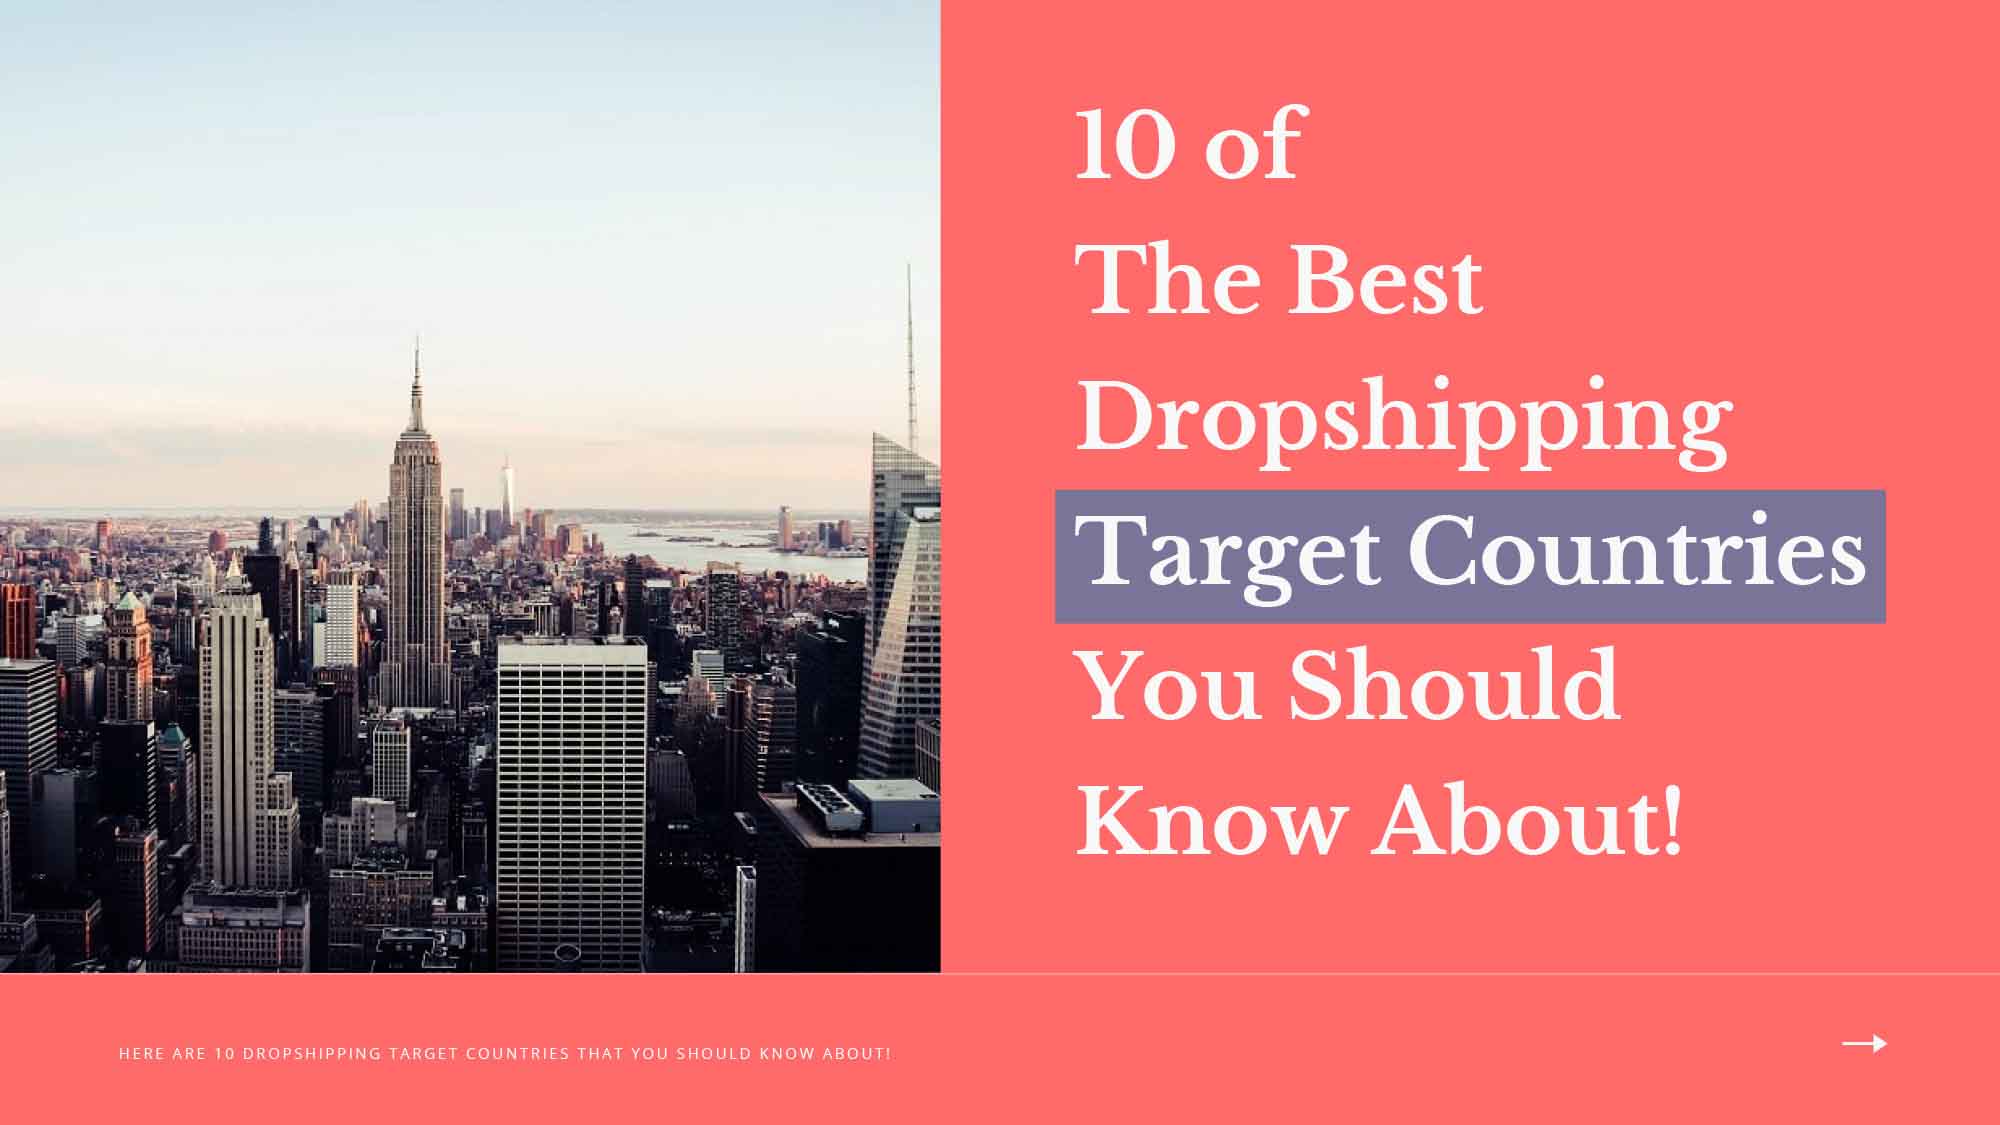 10 Of The Best Dropshipping Target Countries You Should Know About!